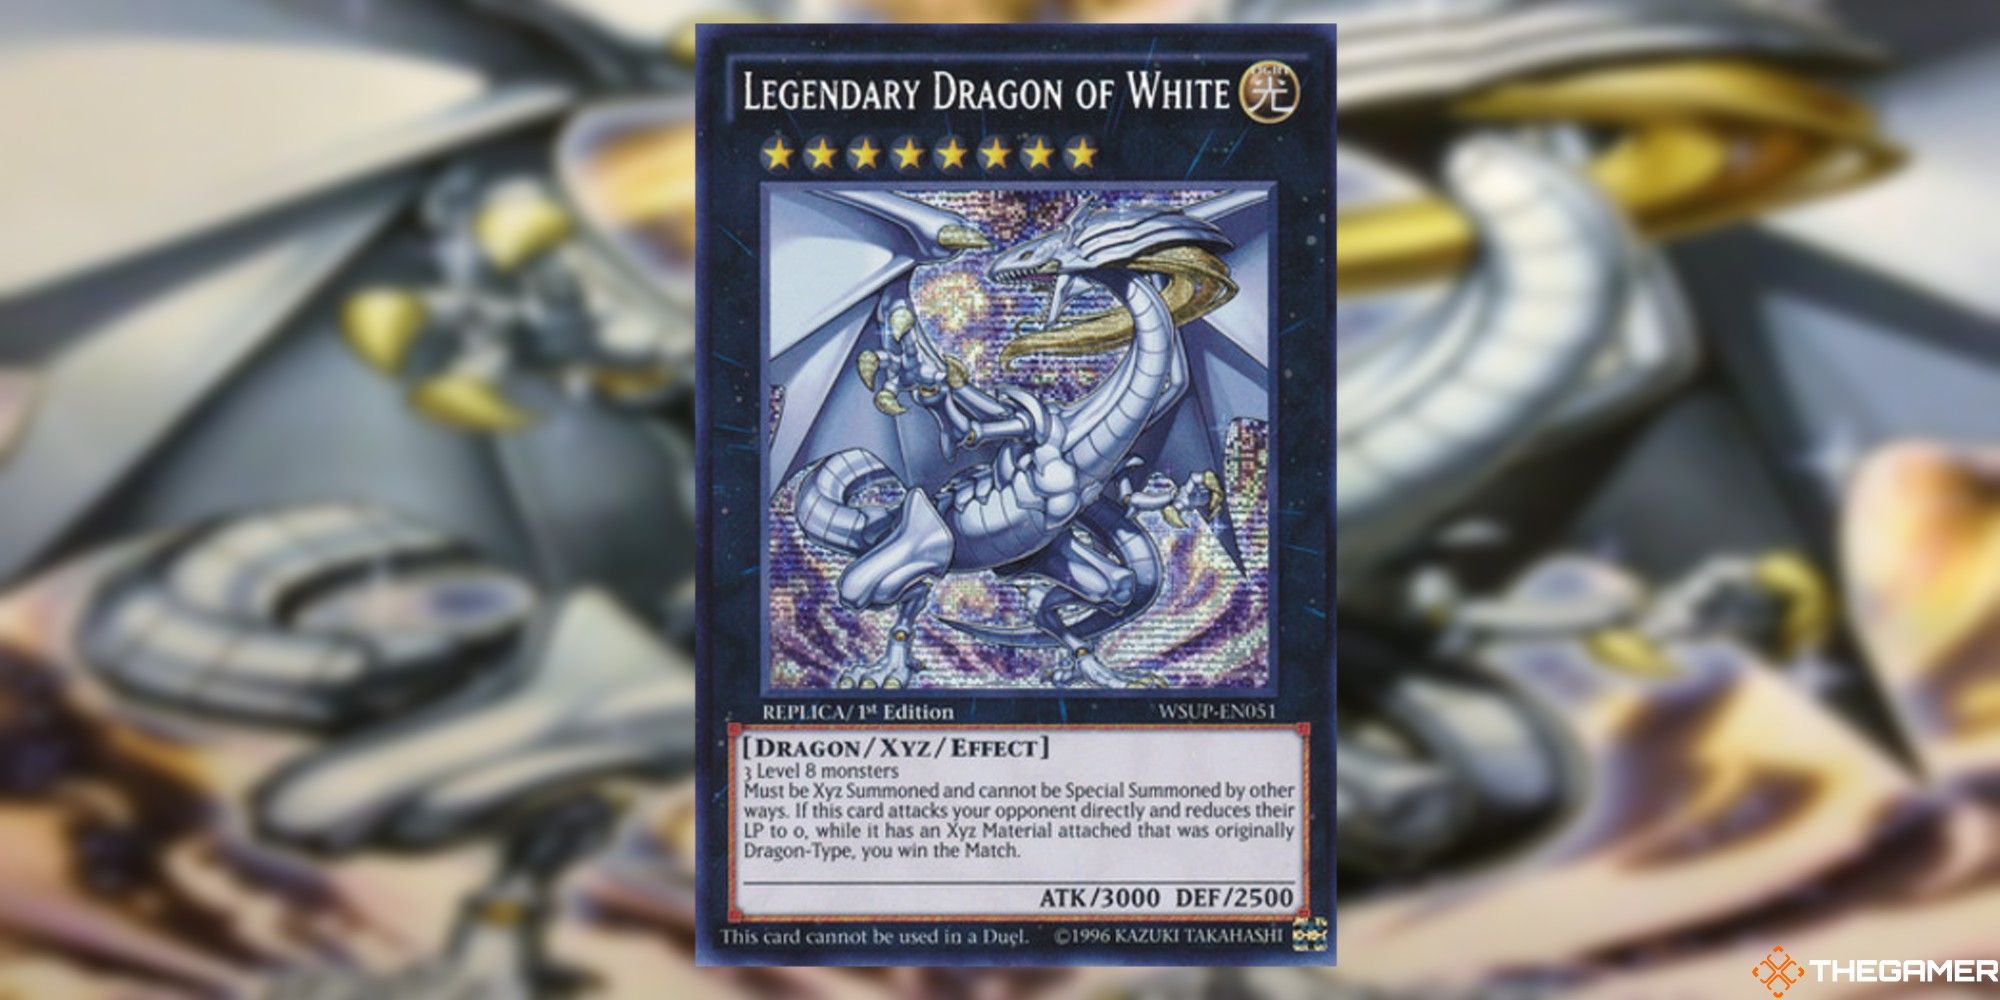 legendary dragon of white card and art background